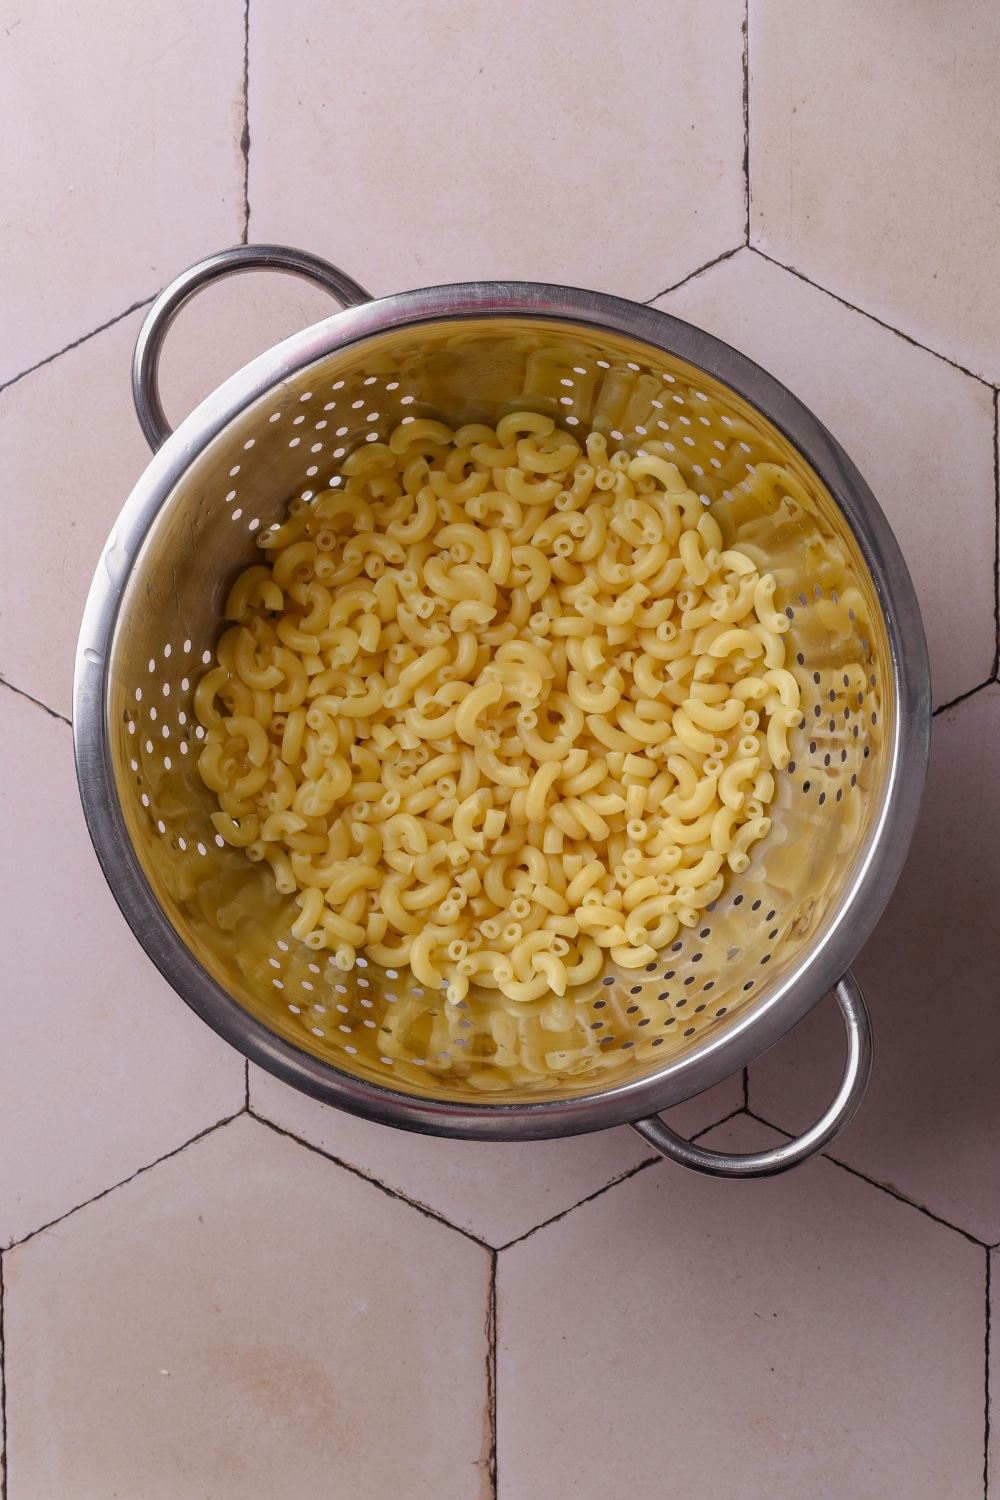 An overhead shot of a metal colander filled with drained elbow macaroni.